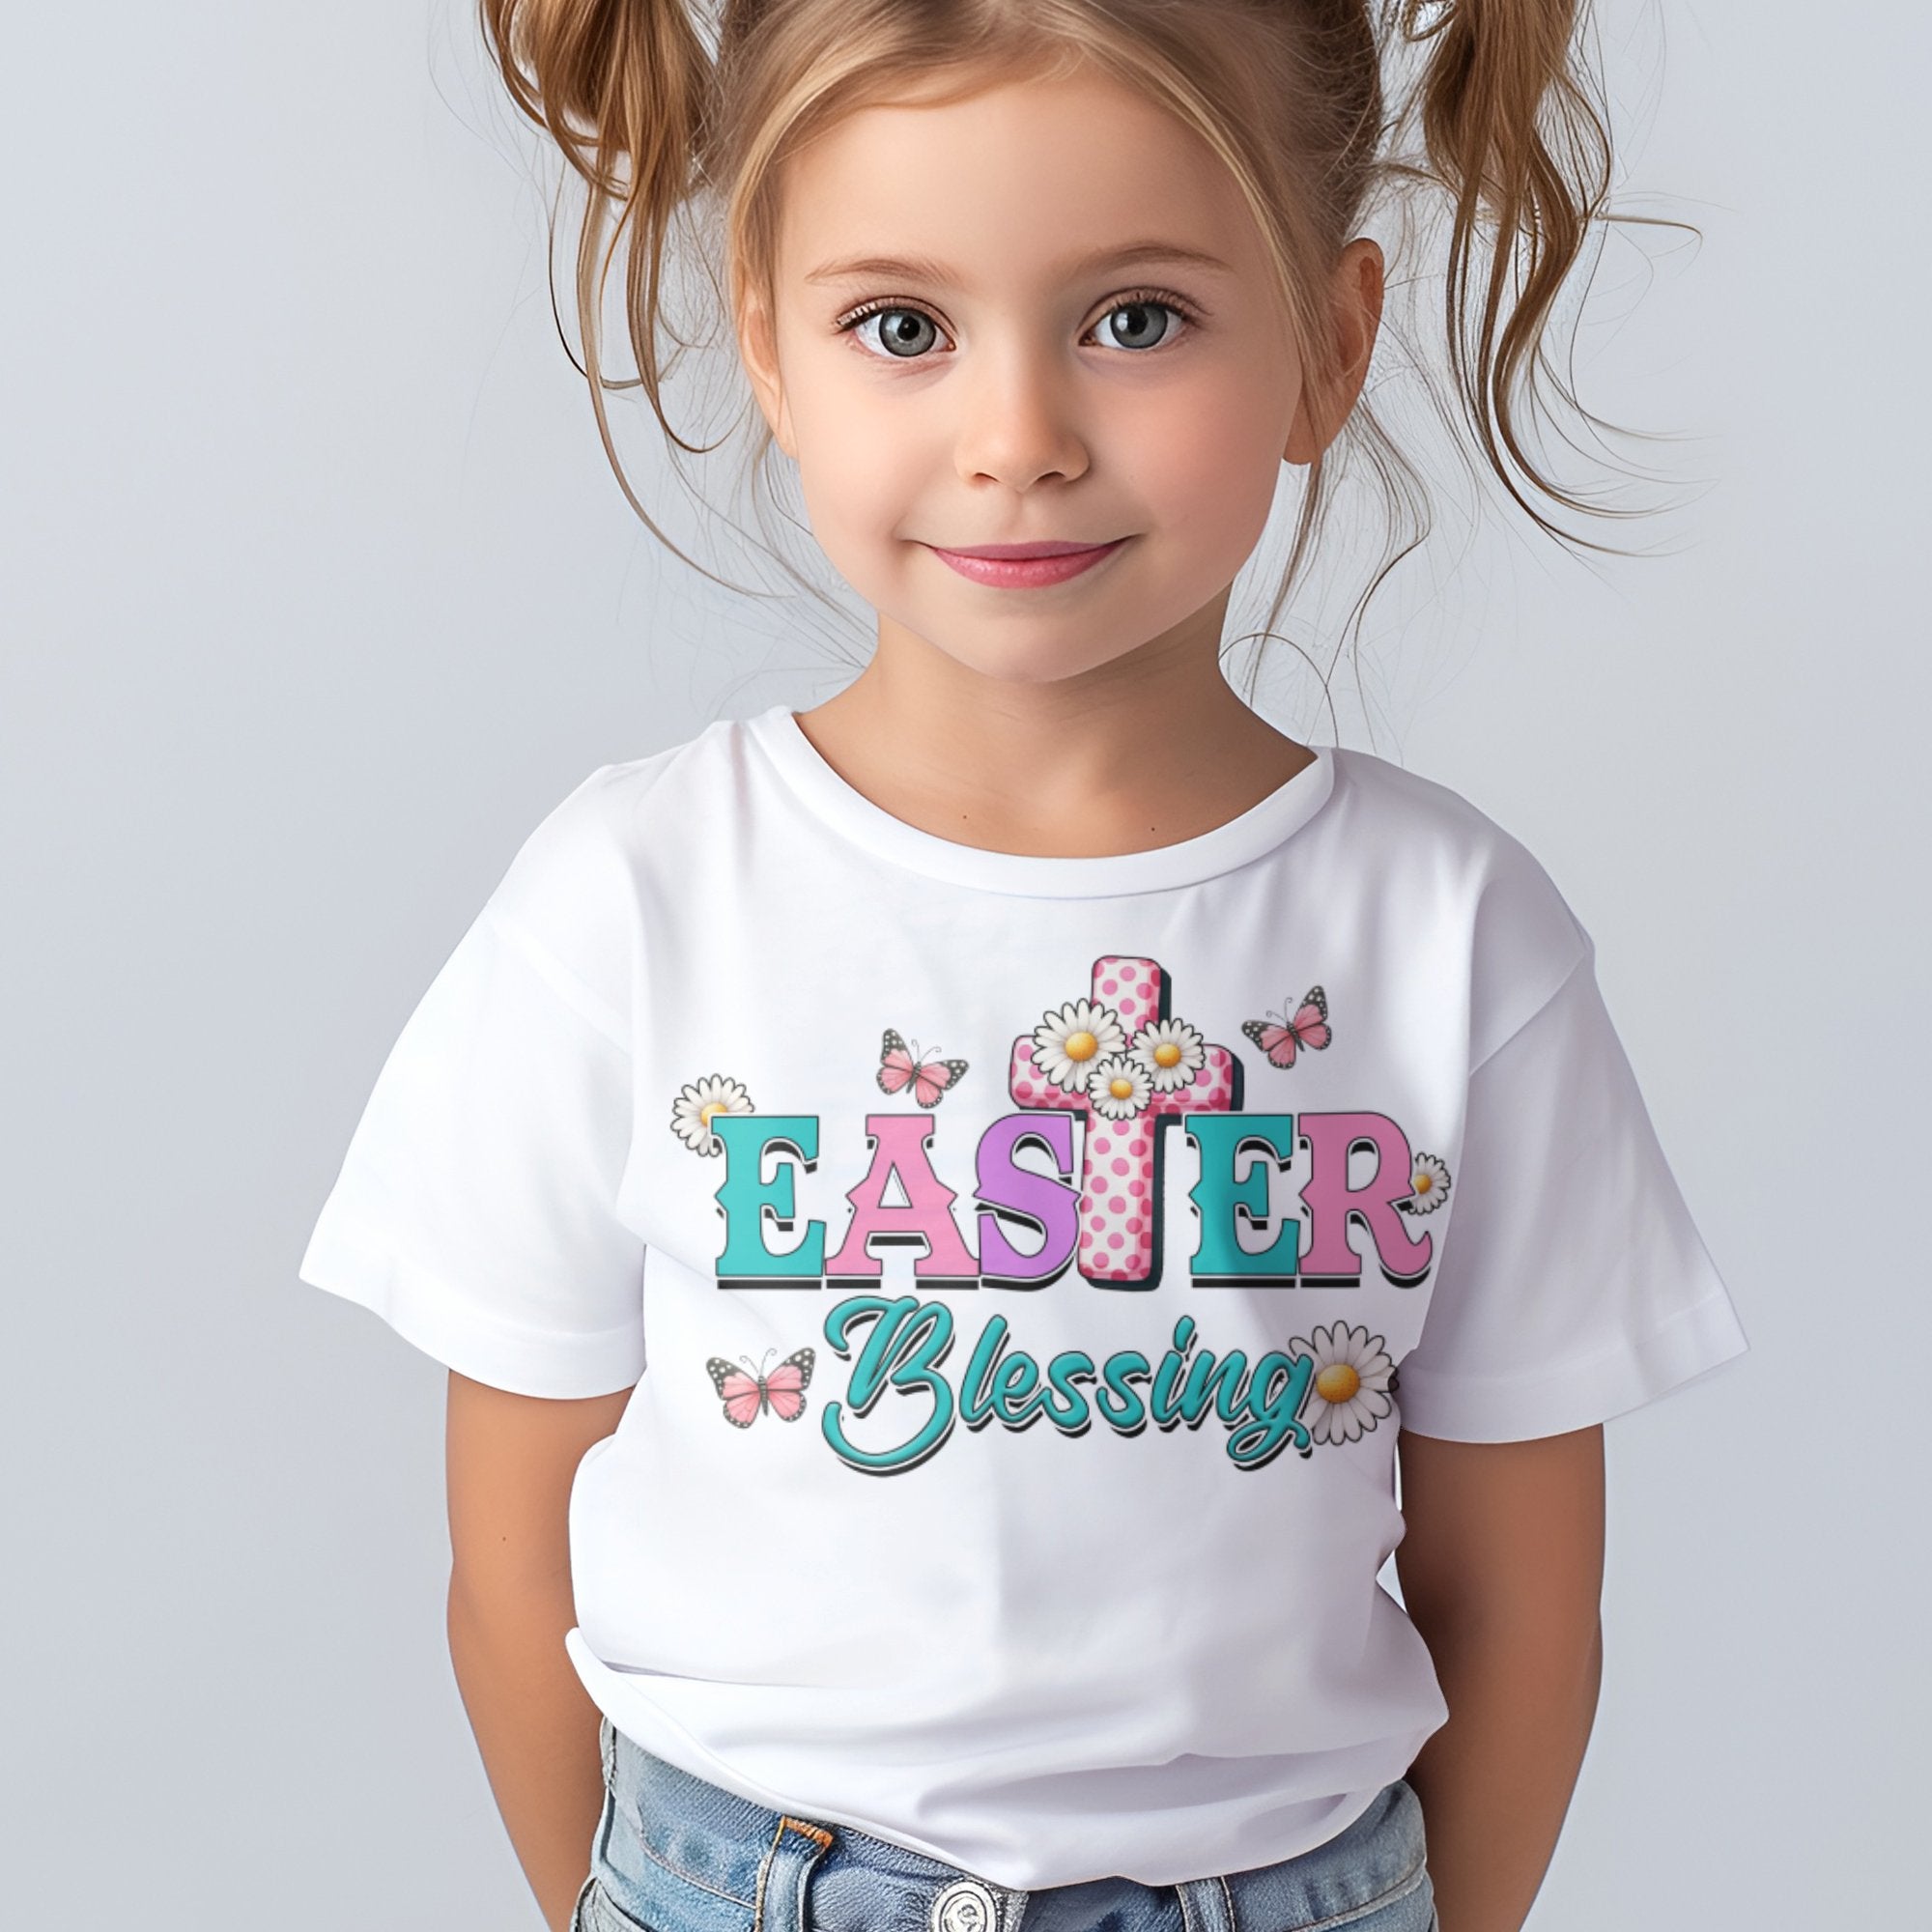 Easter Blessings Toddler Short Sleeve Tee Size: 5/6T Color: Pink Jesus Passion Apparel